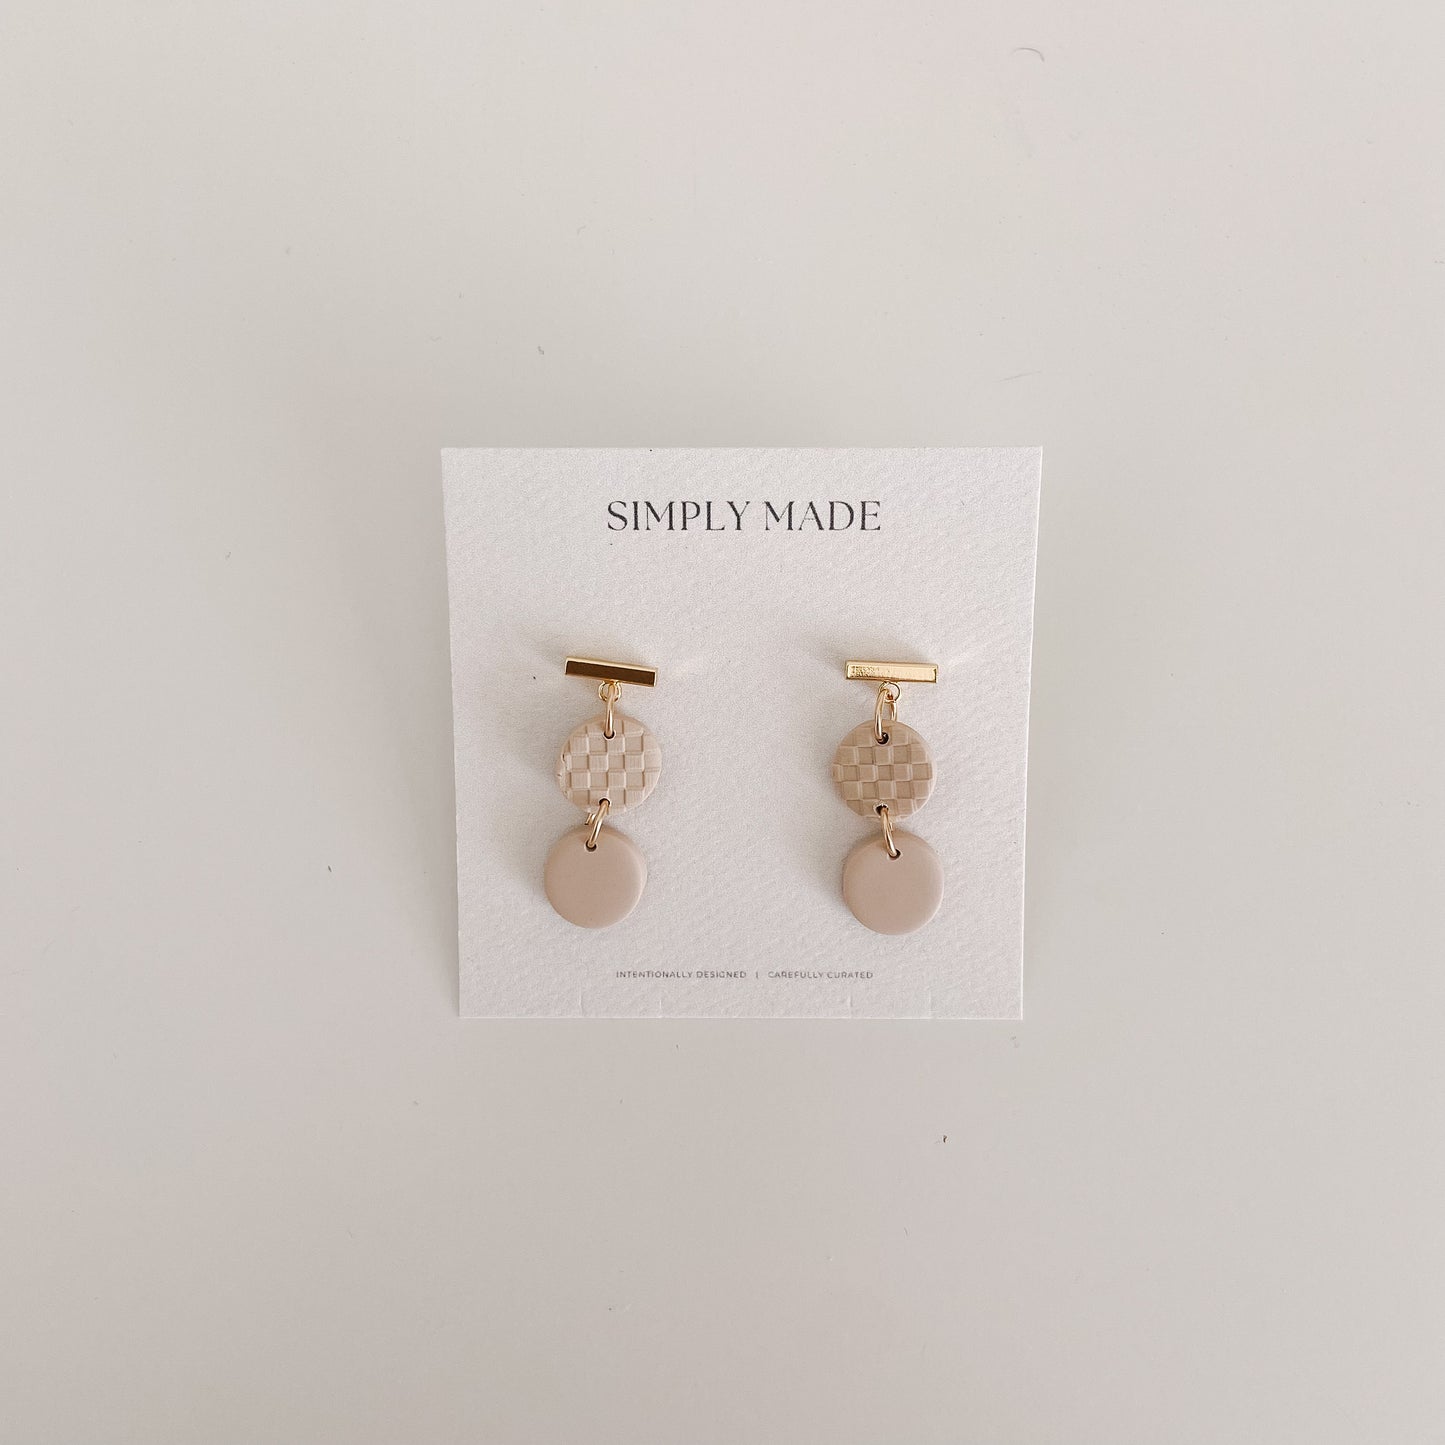 Checkered #4 — clay earrings